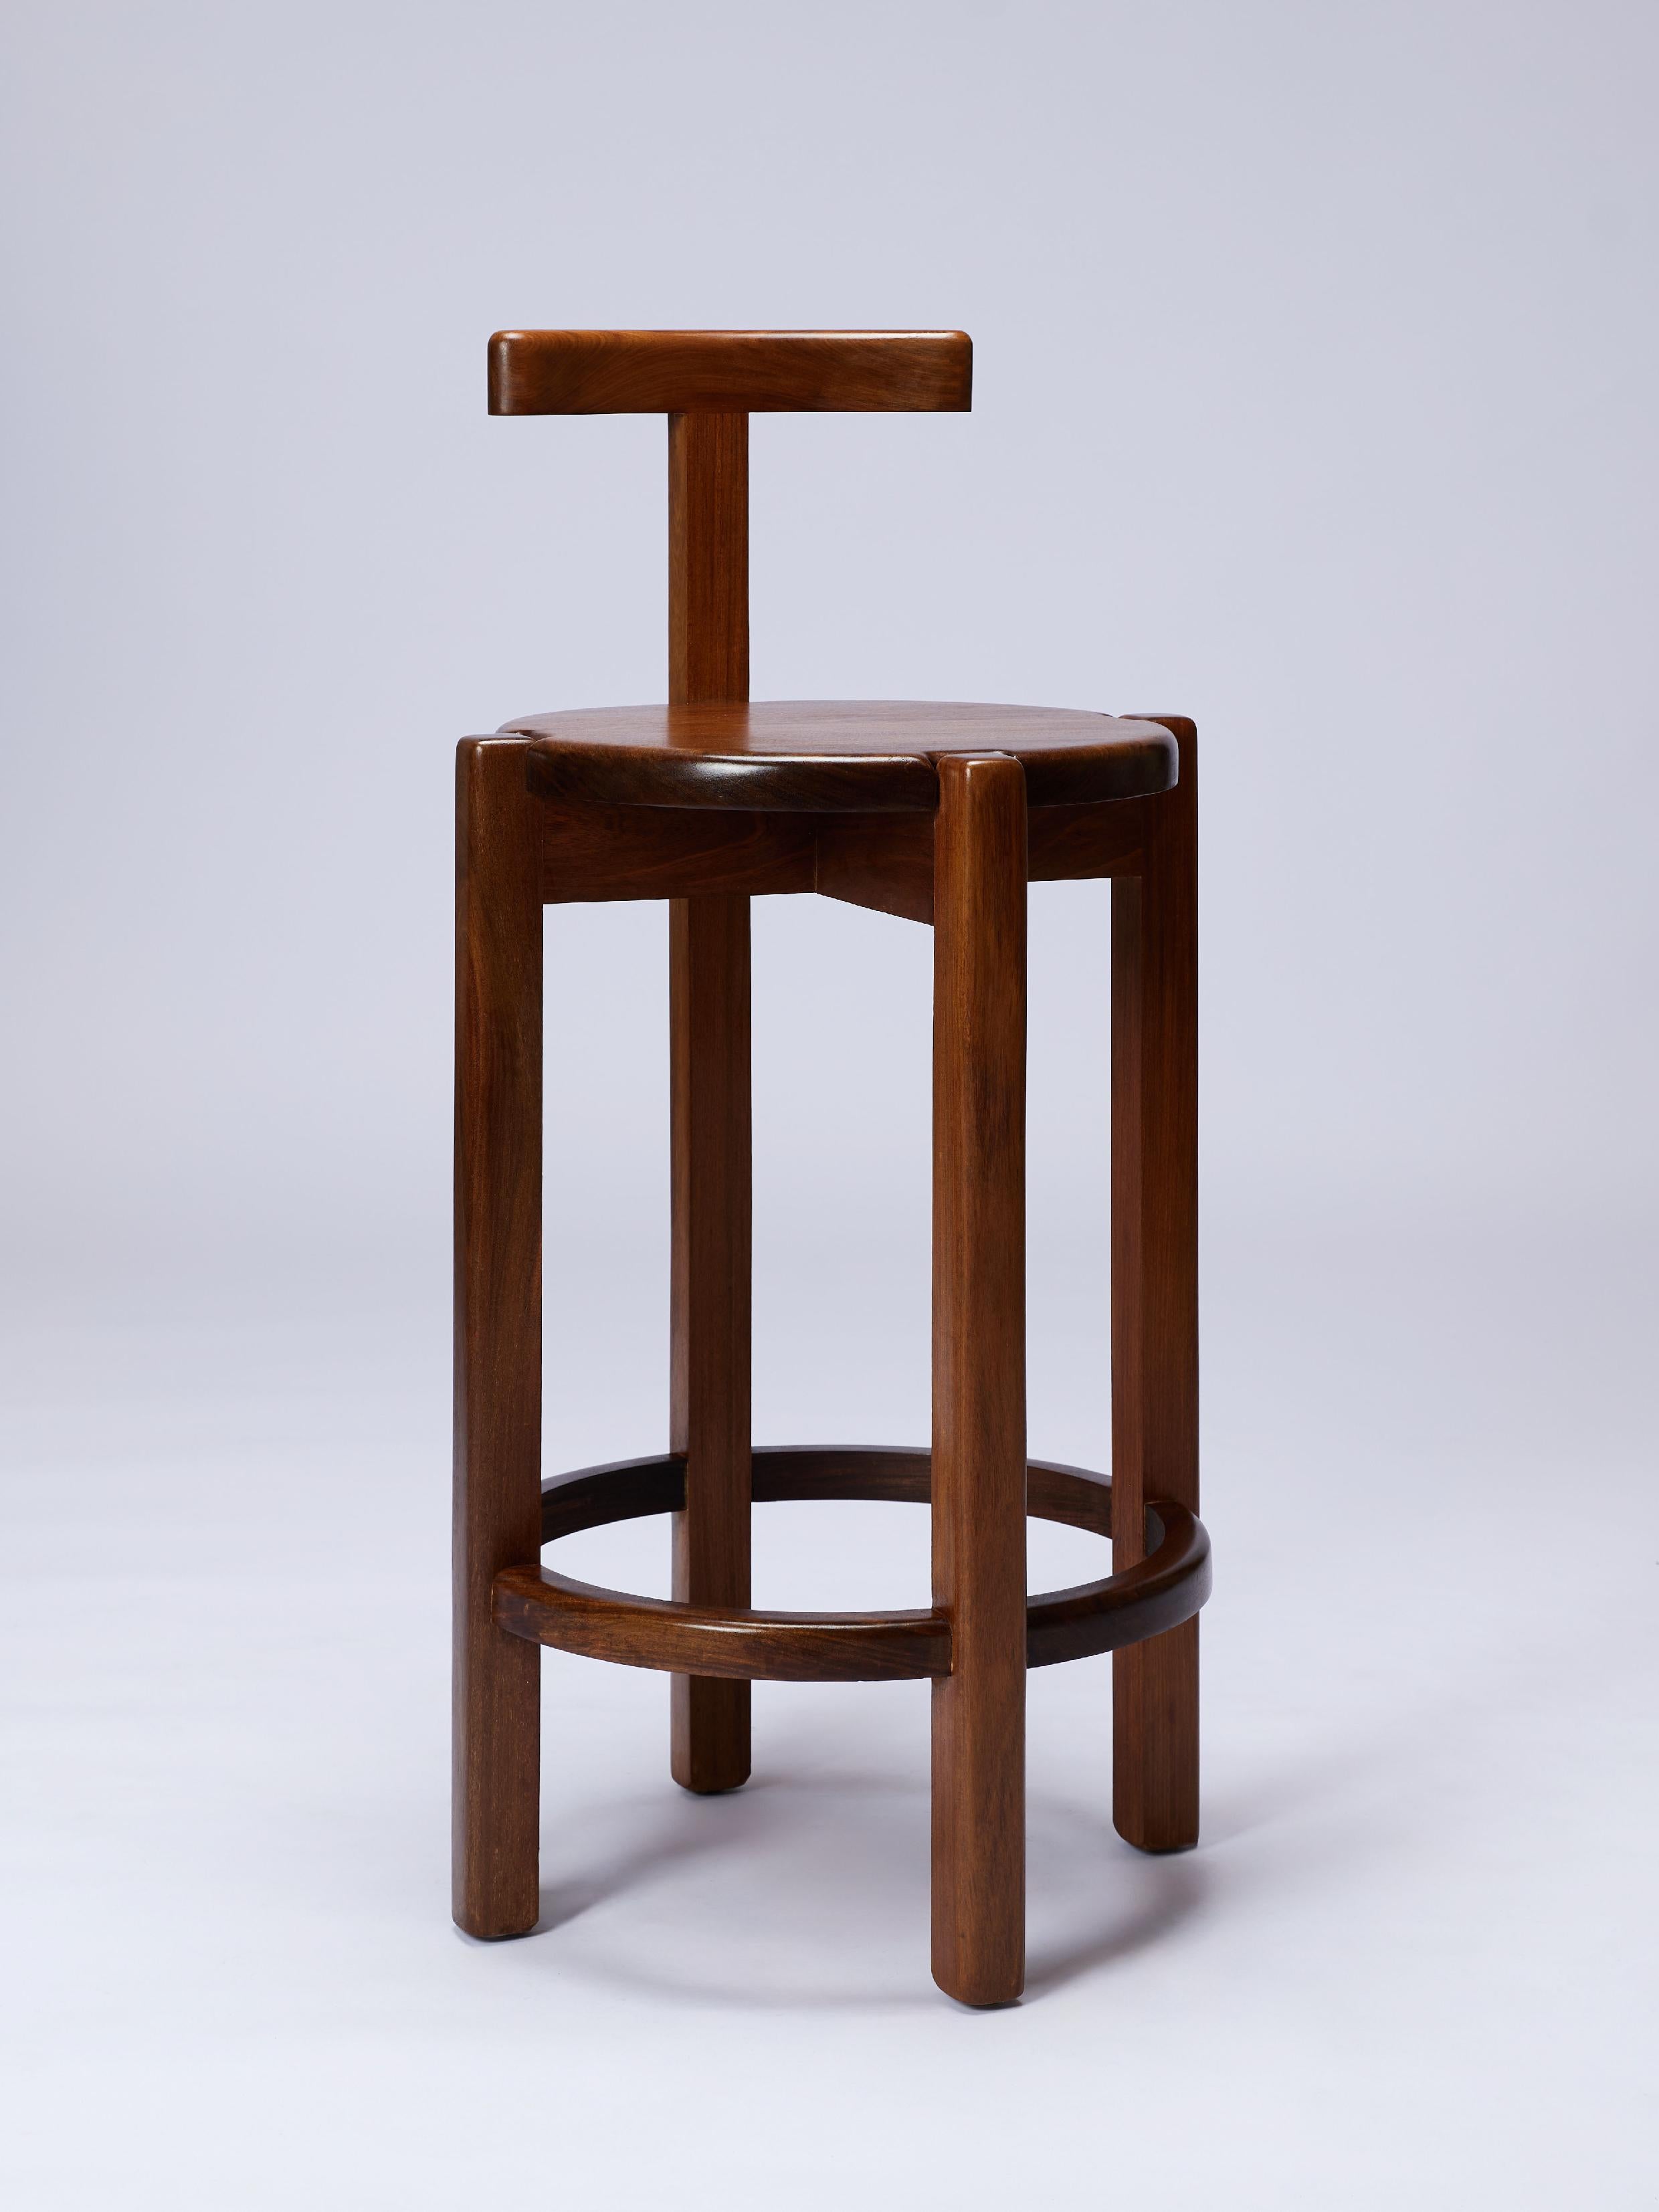 Argentine ORNO Contemporary Bar Stool in Solid Hardwood by Ries For Sale